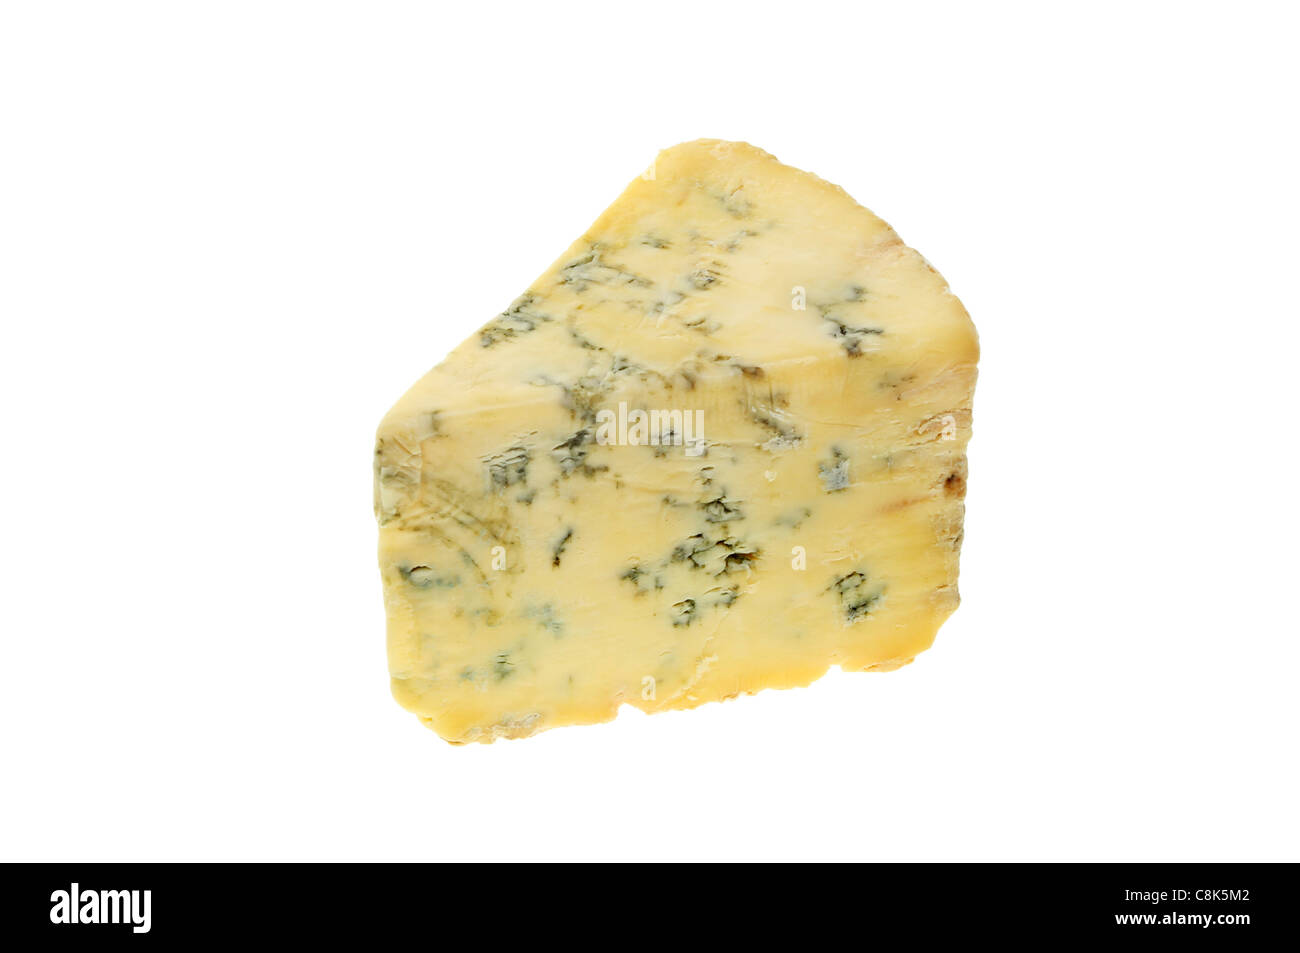 Wedge of stilton blue cheese isolated against white Stock Photo